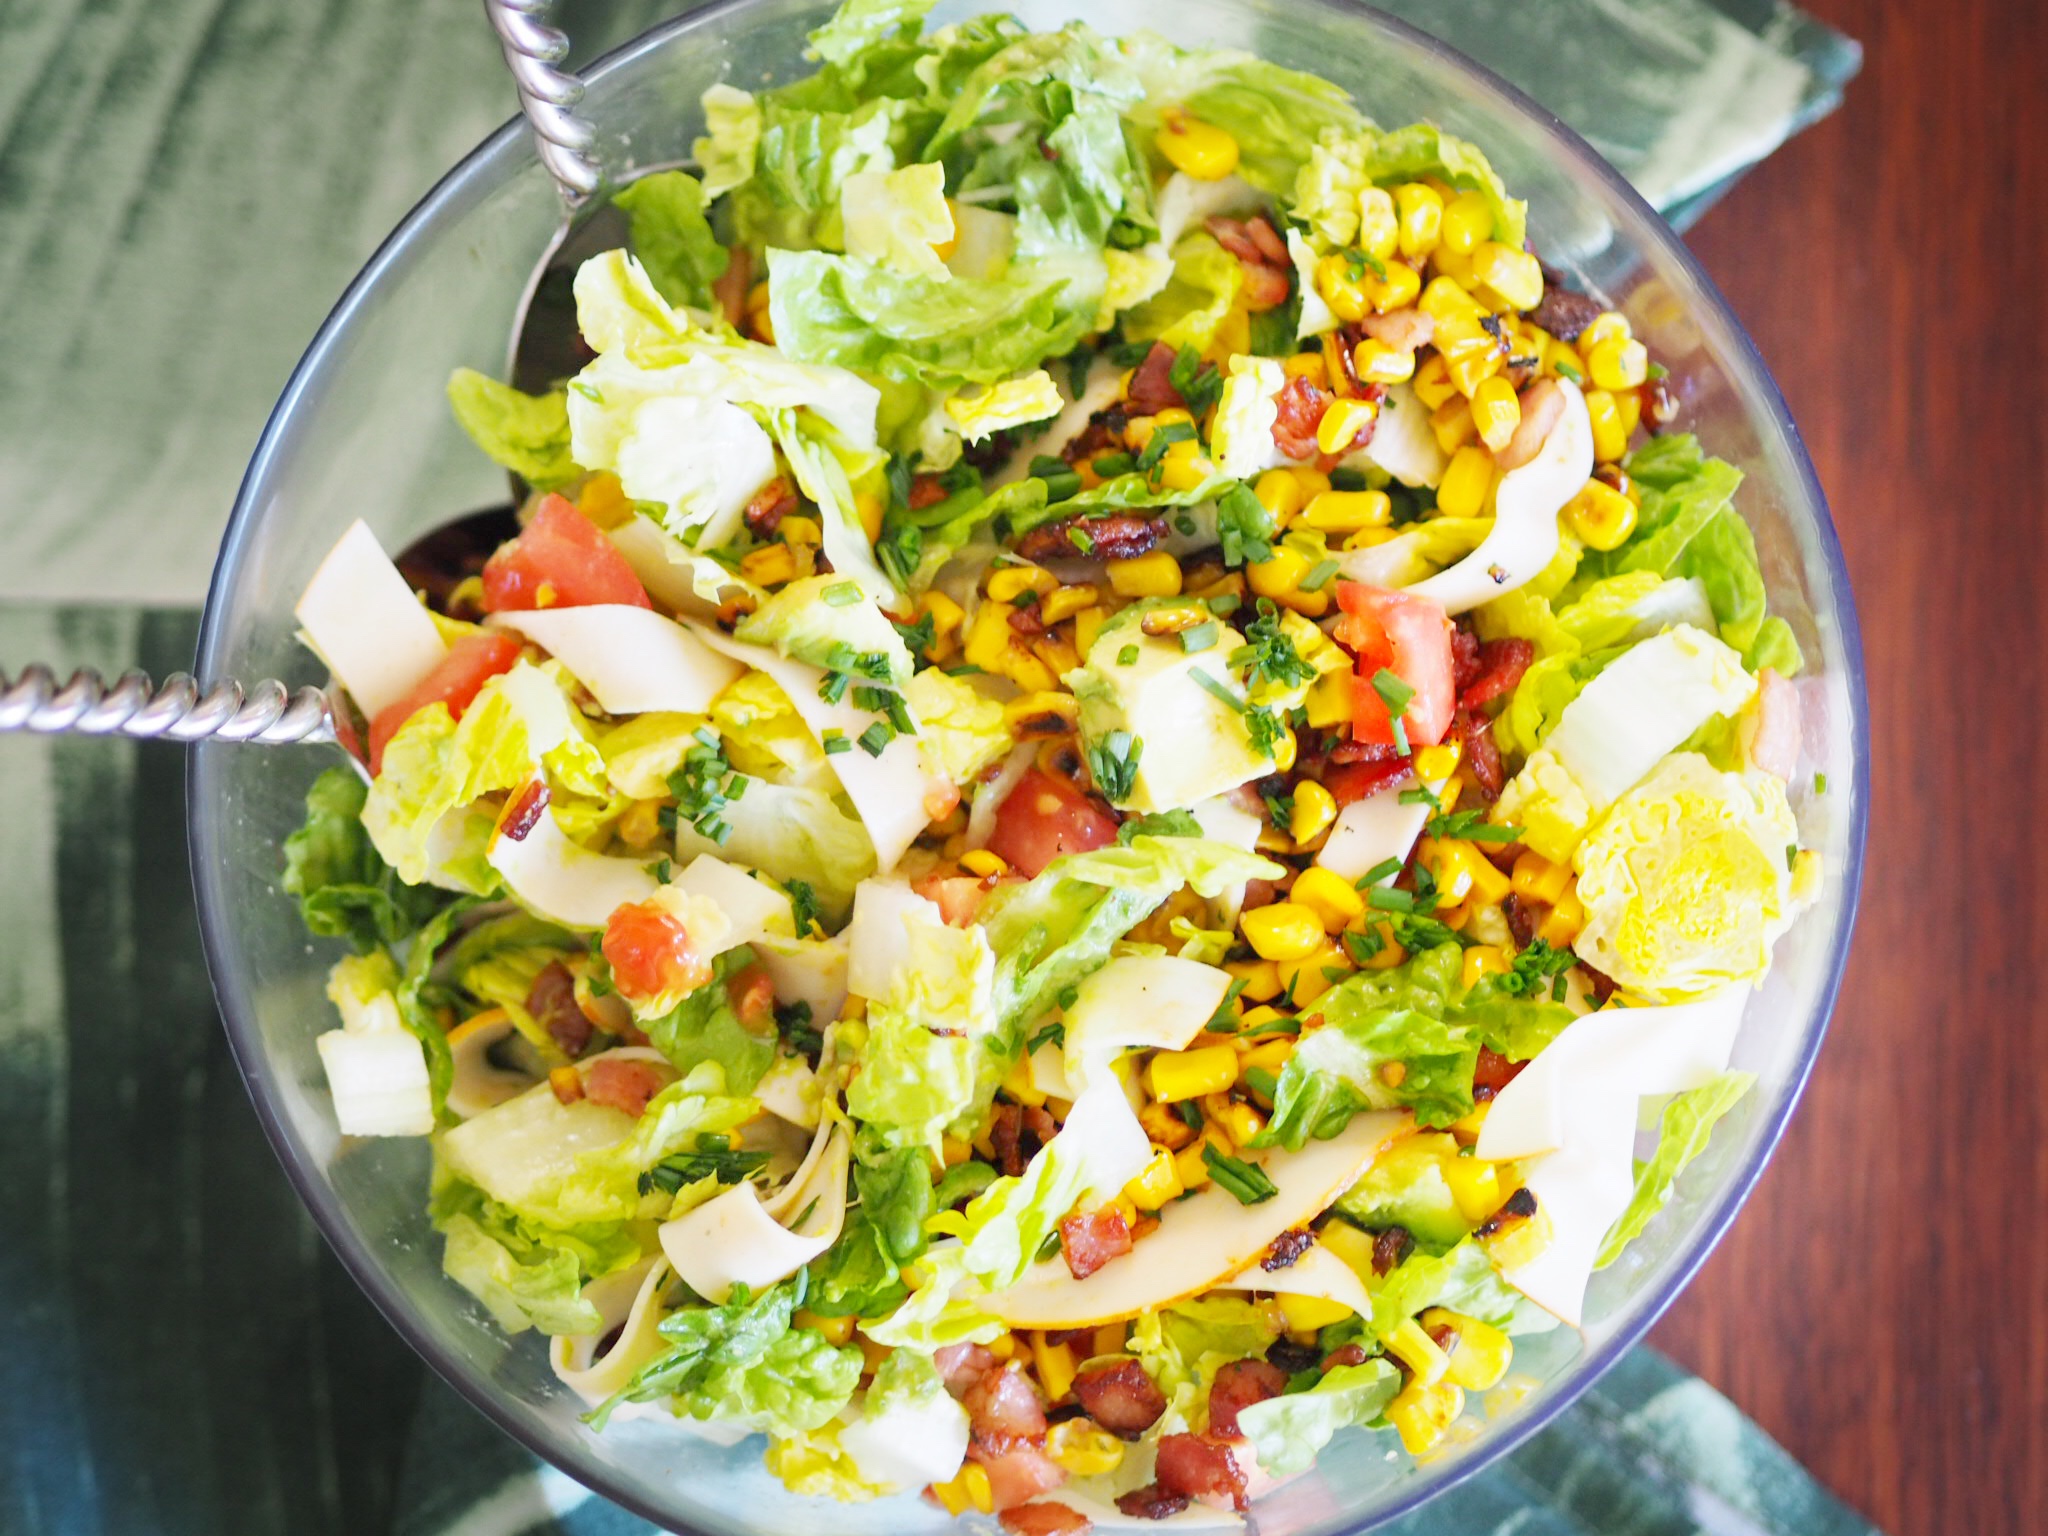 Chopped Salad with Deli Chicken, Bacon and Corn